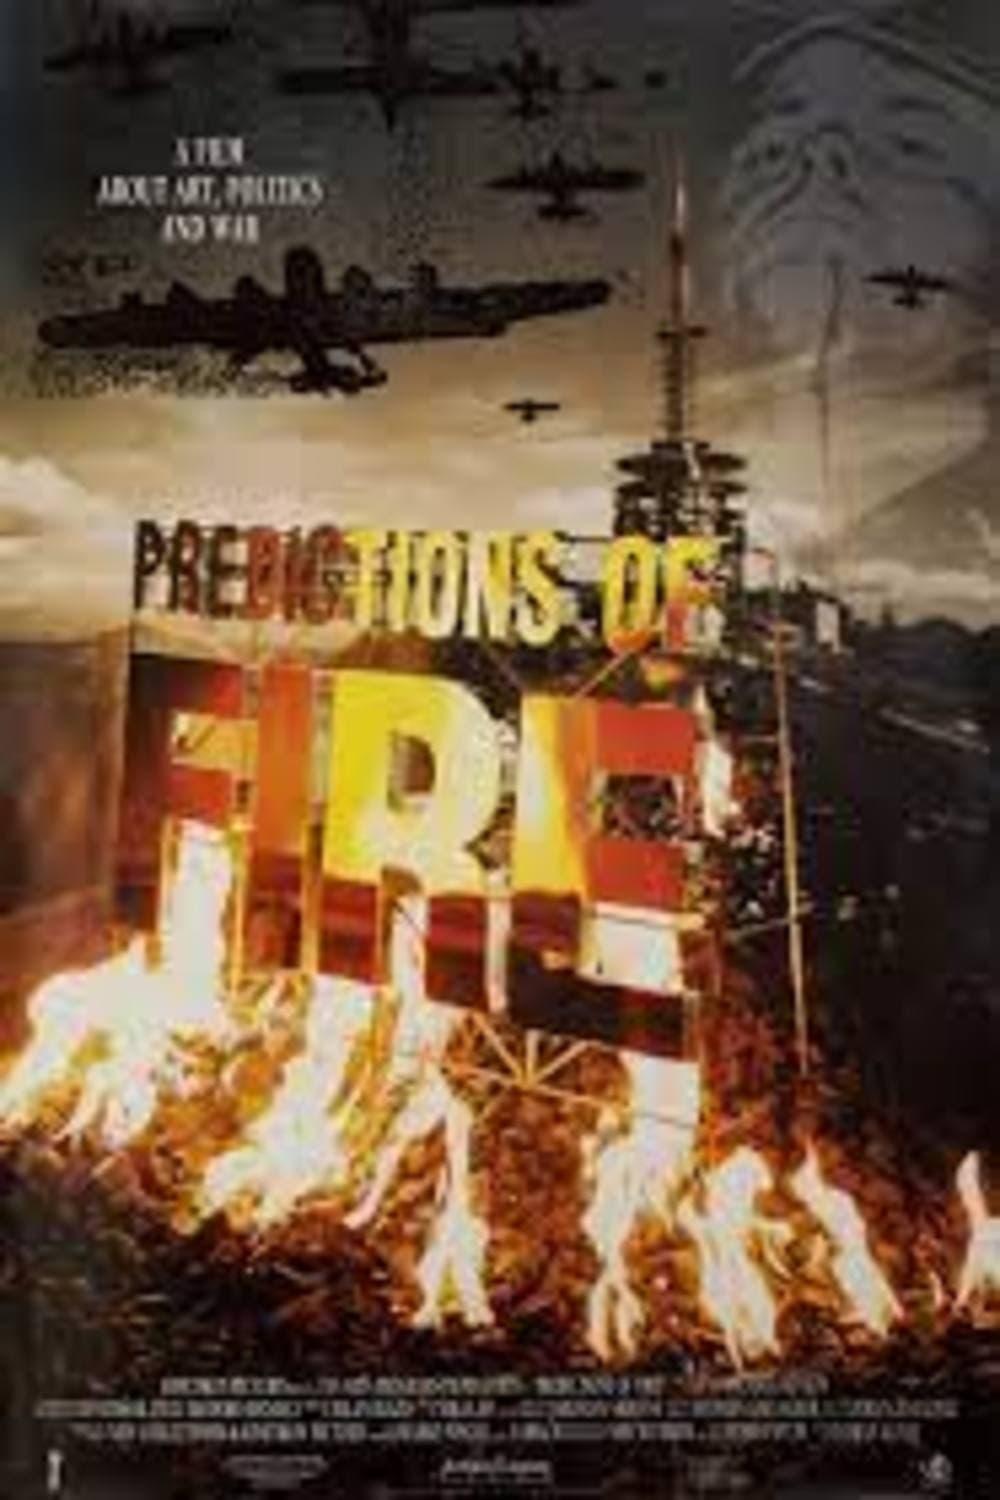 Predictions of Fire poster